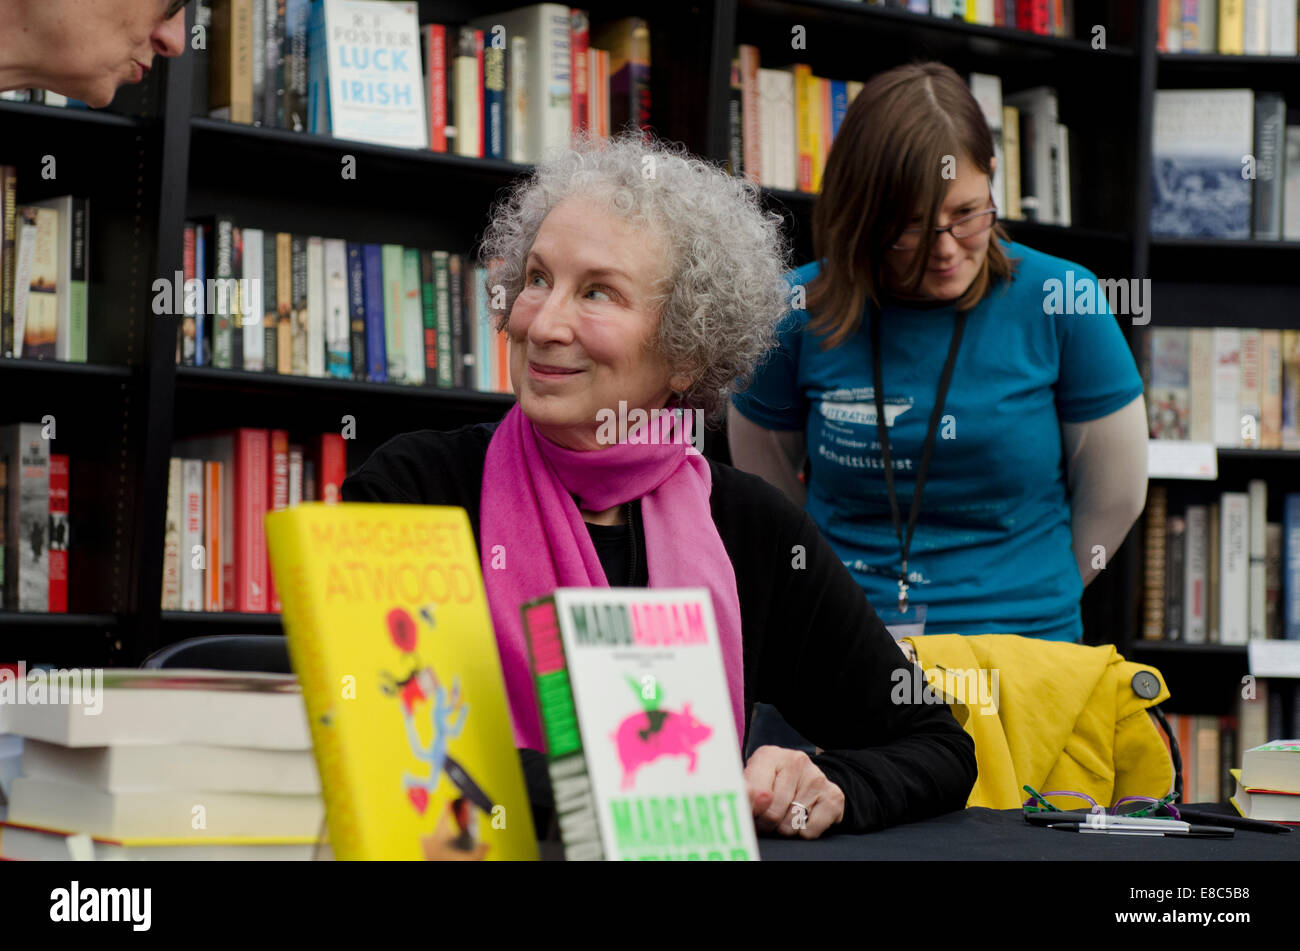 Margaret Atwood, novelist signs books at the Cheltenham Literary Festival, Uk  4th October 2014 Credit:  Prixnews/Alamy Live News Stock Photo